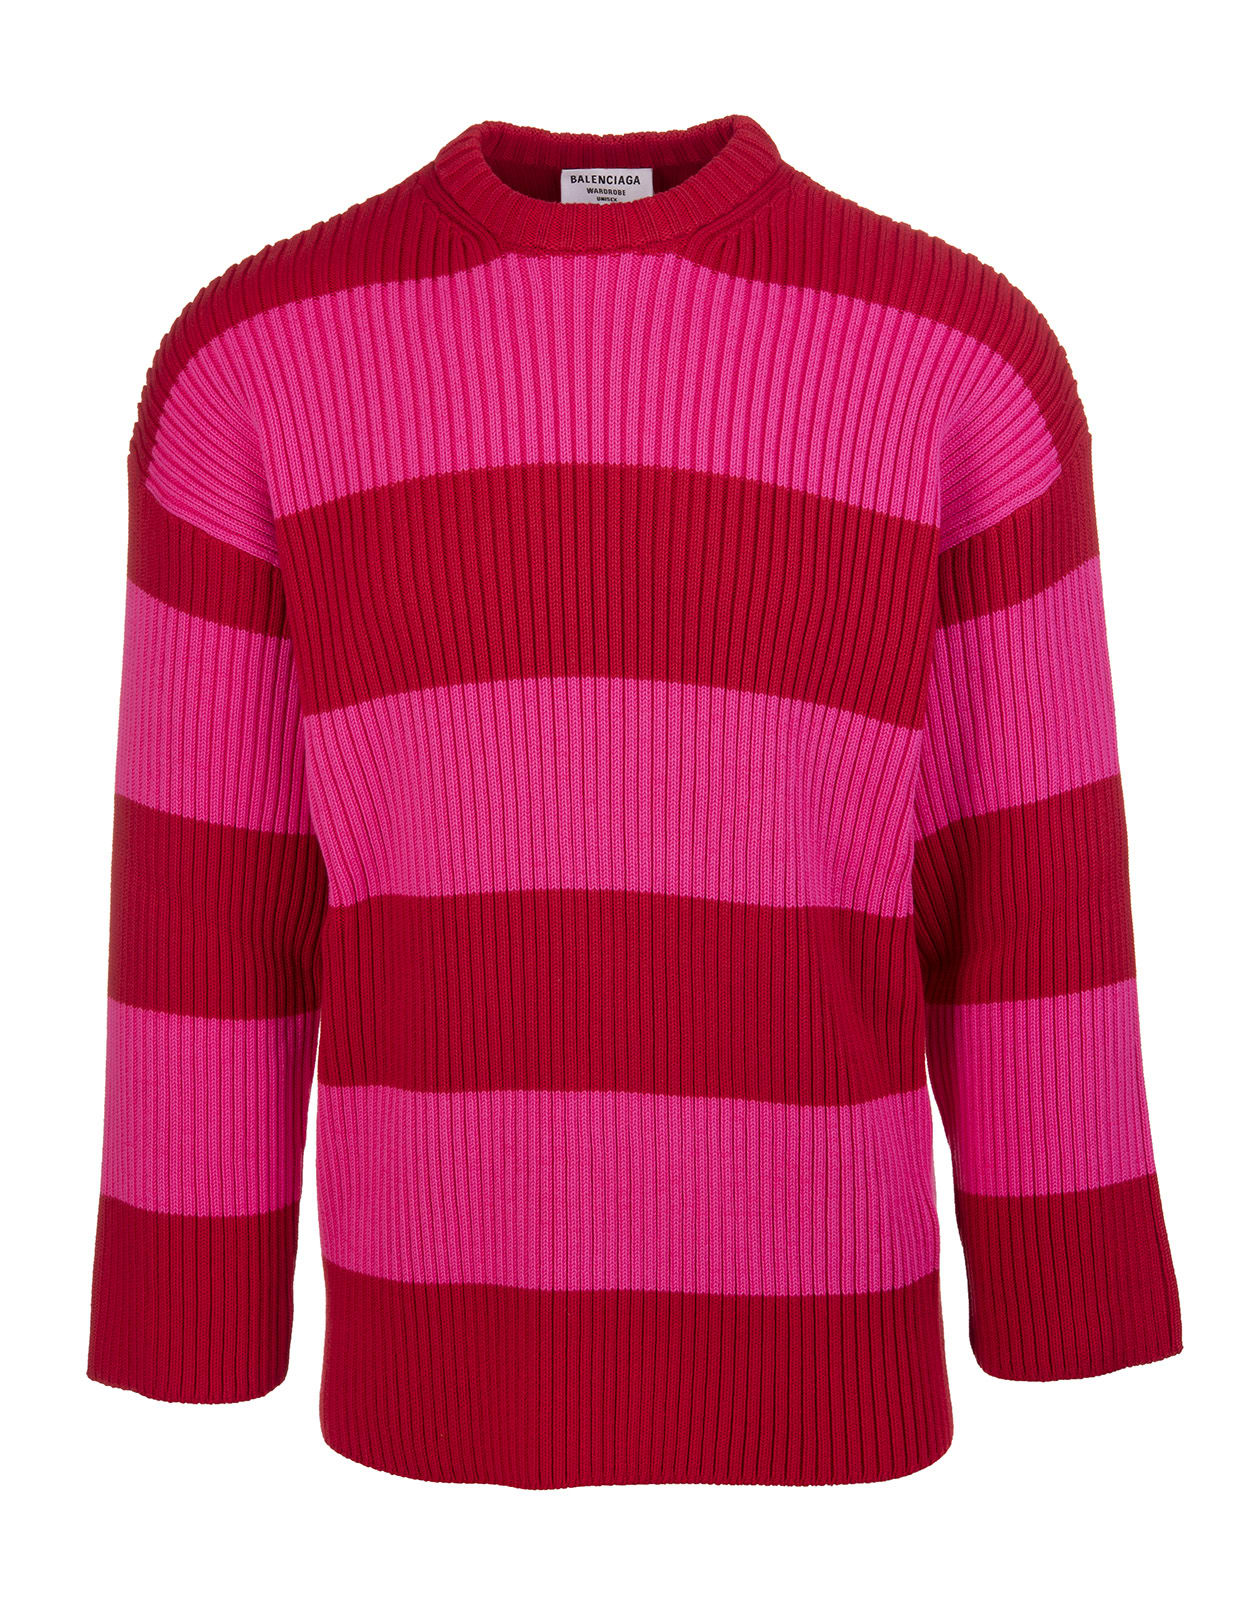 Balenciaga Unisex Pink And Red Striped Crewneck Pullover